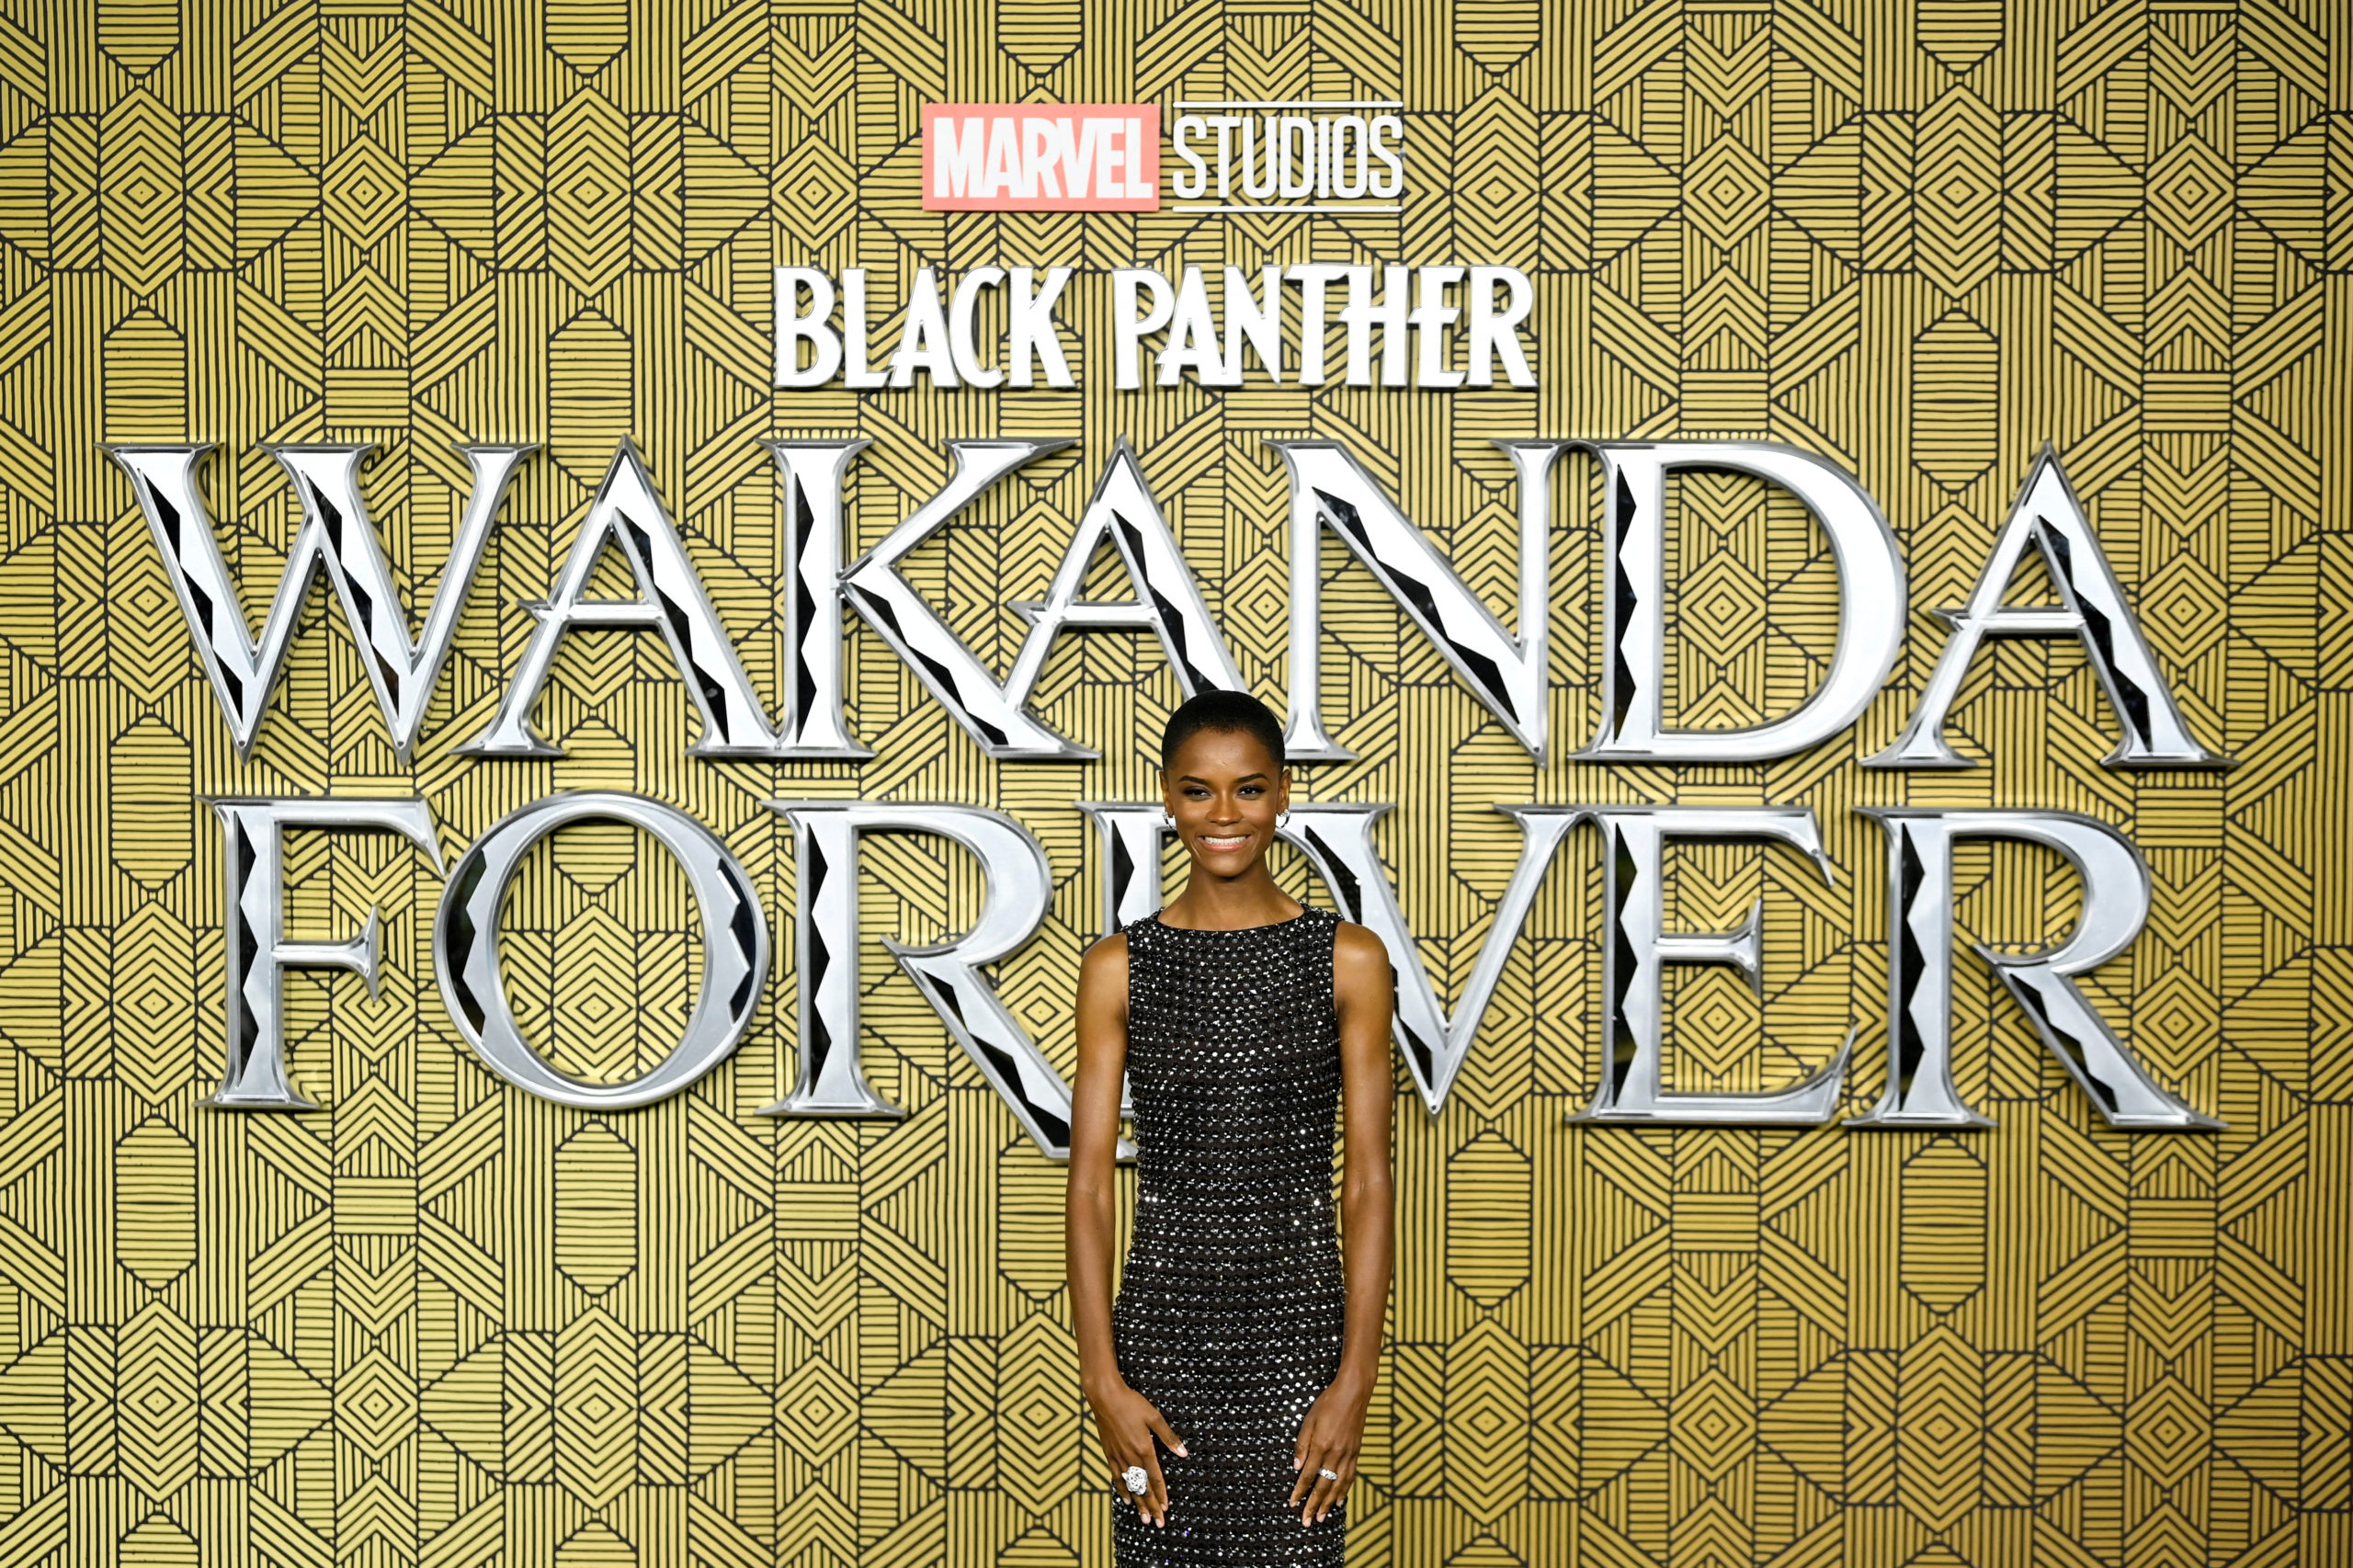 Cast member Letitia Wright attends the premiere of "Black Panther: Wakanda Forever" in London, Britain November 3, 2022. REUTERS/Toby Melville/File Photo